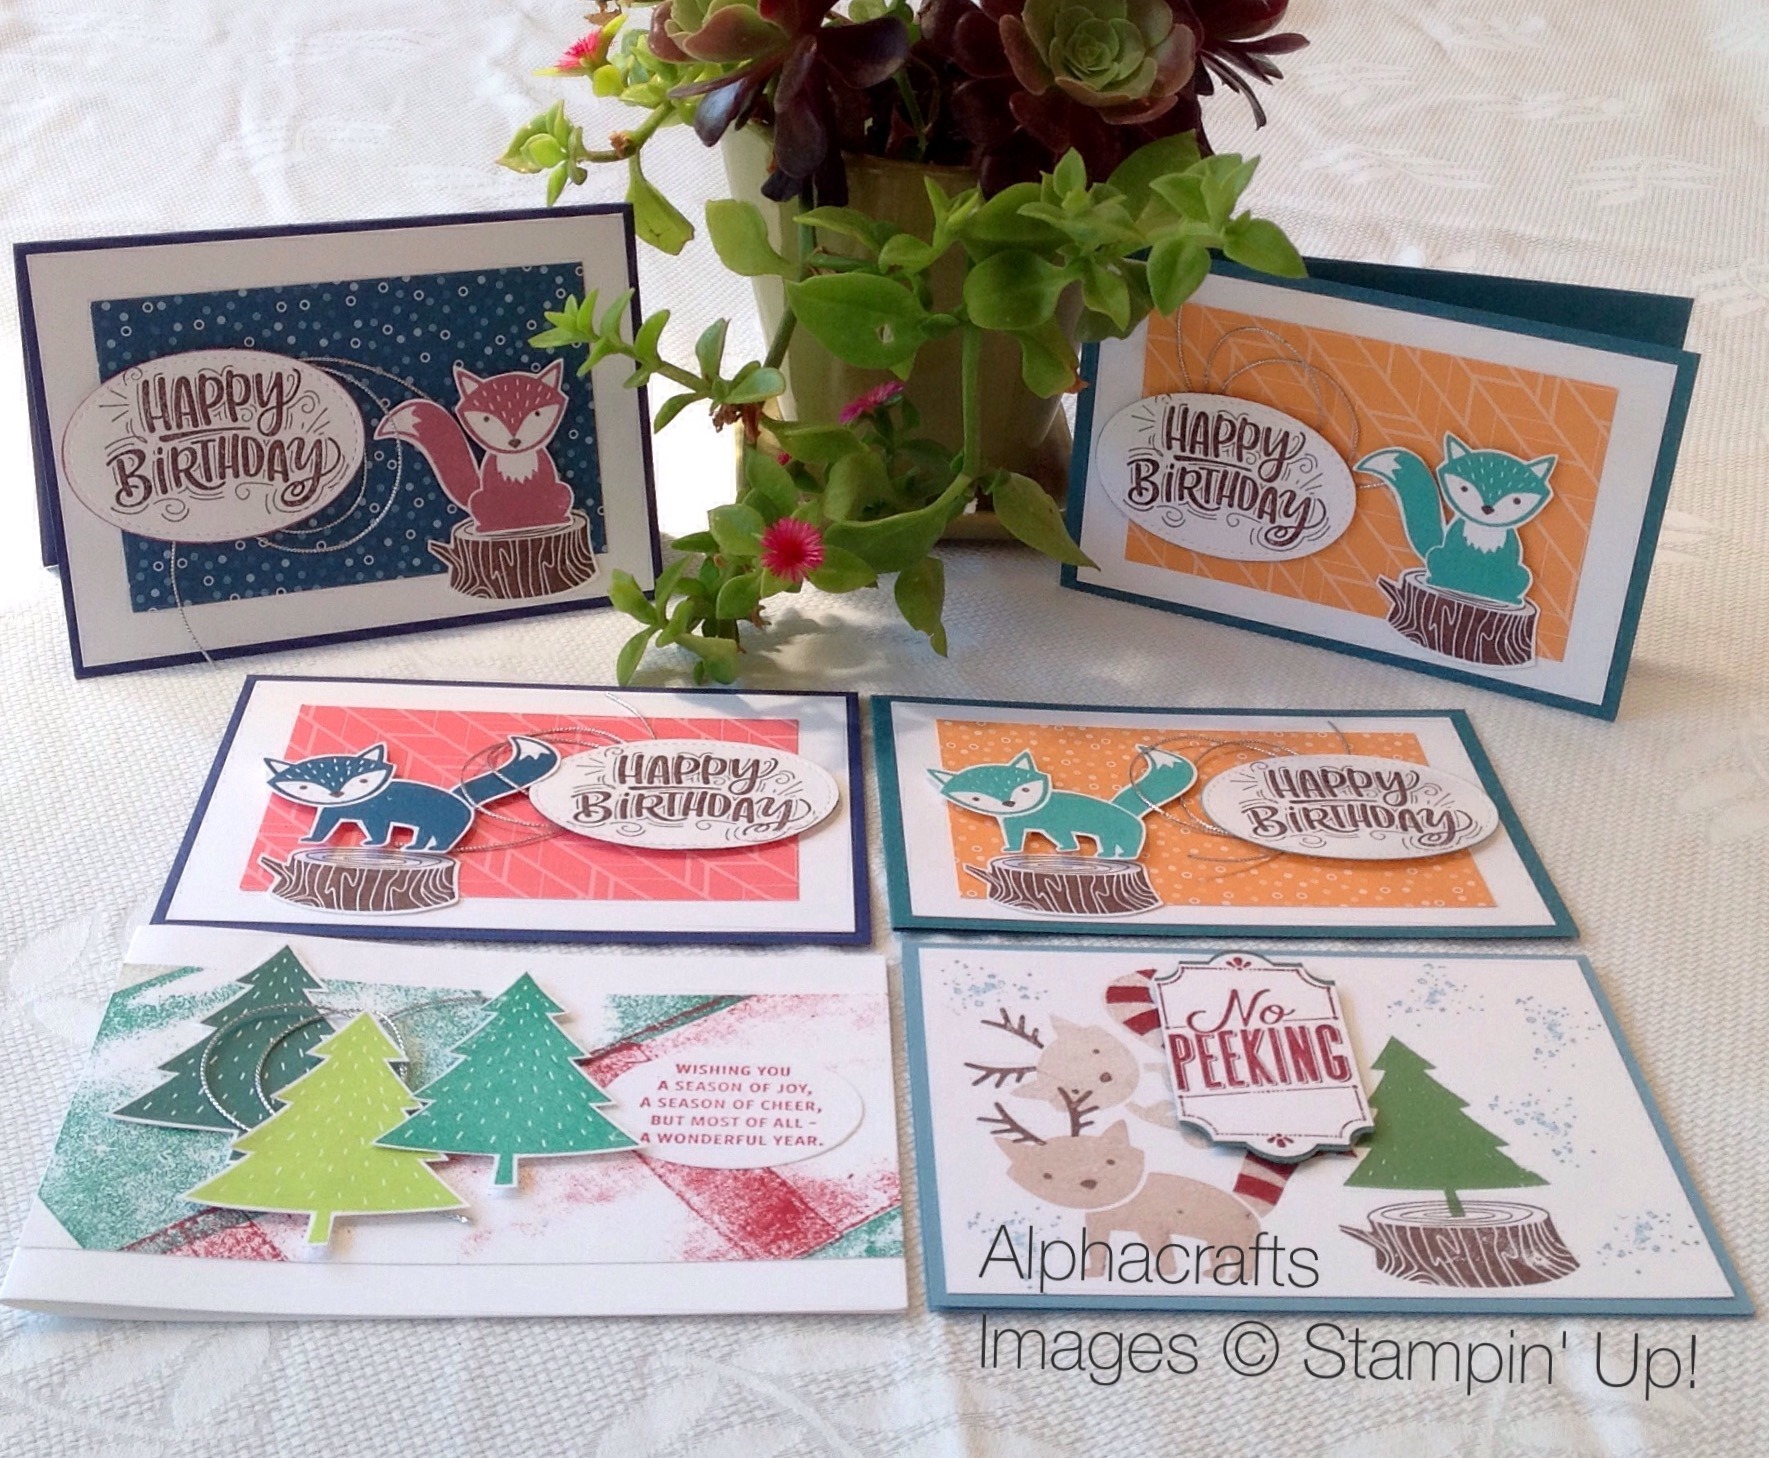 Handmade cards using the Foxy Friends stamp set from Stampin' Up!.